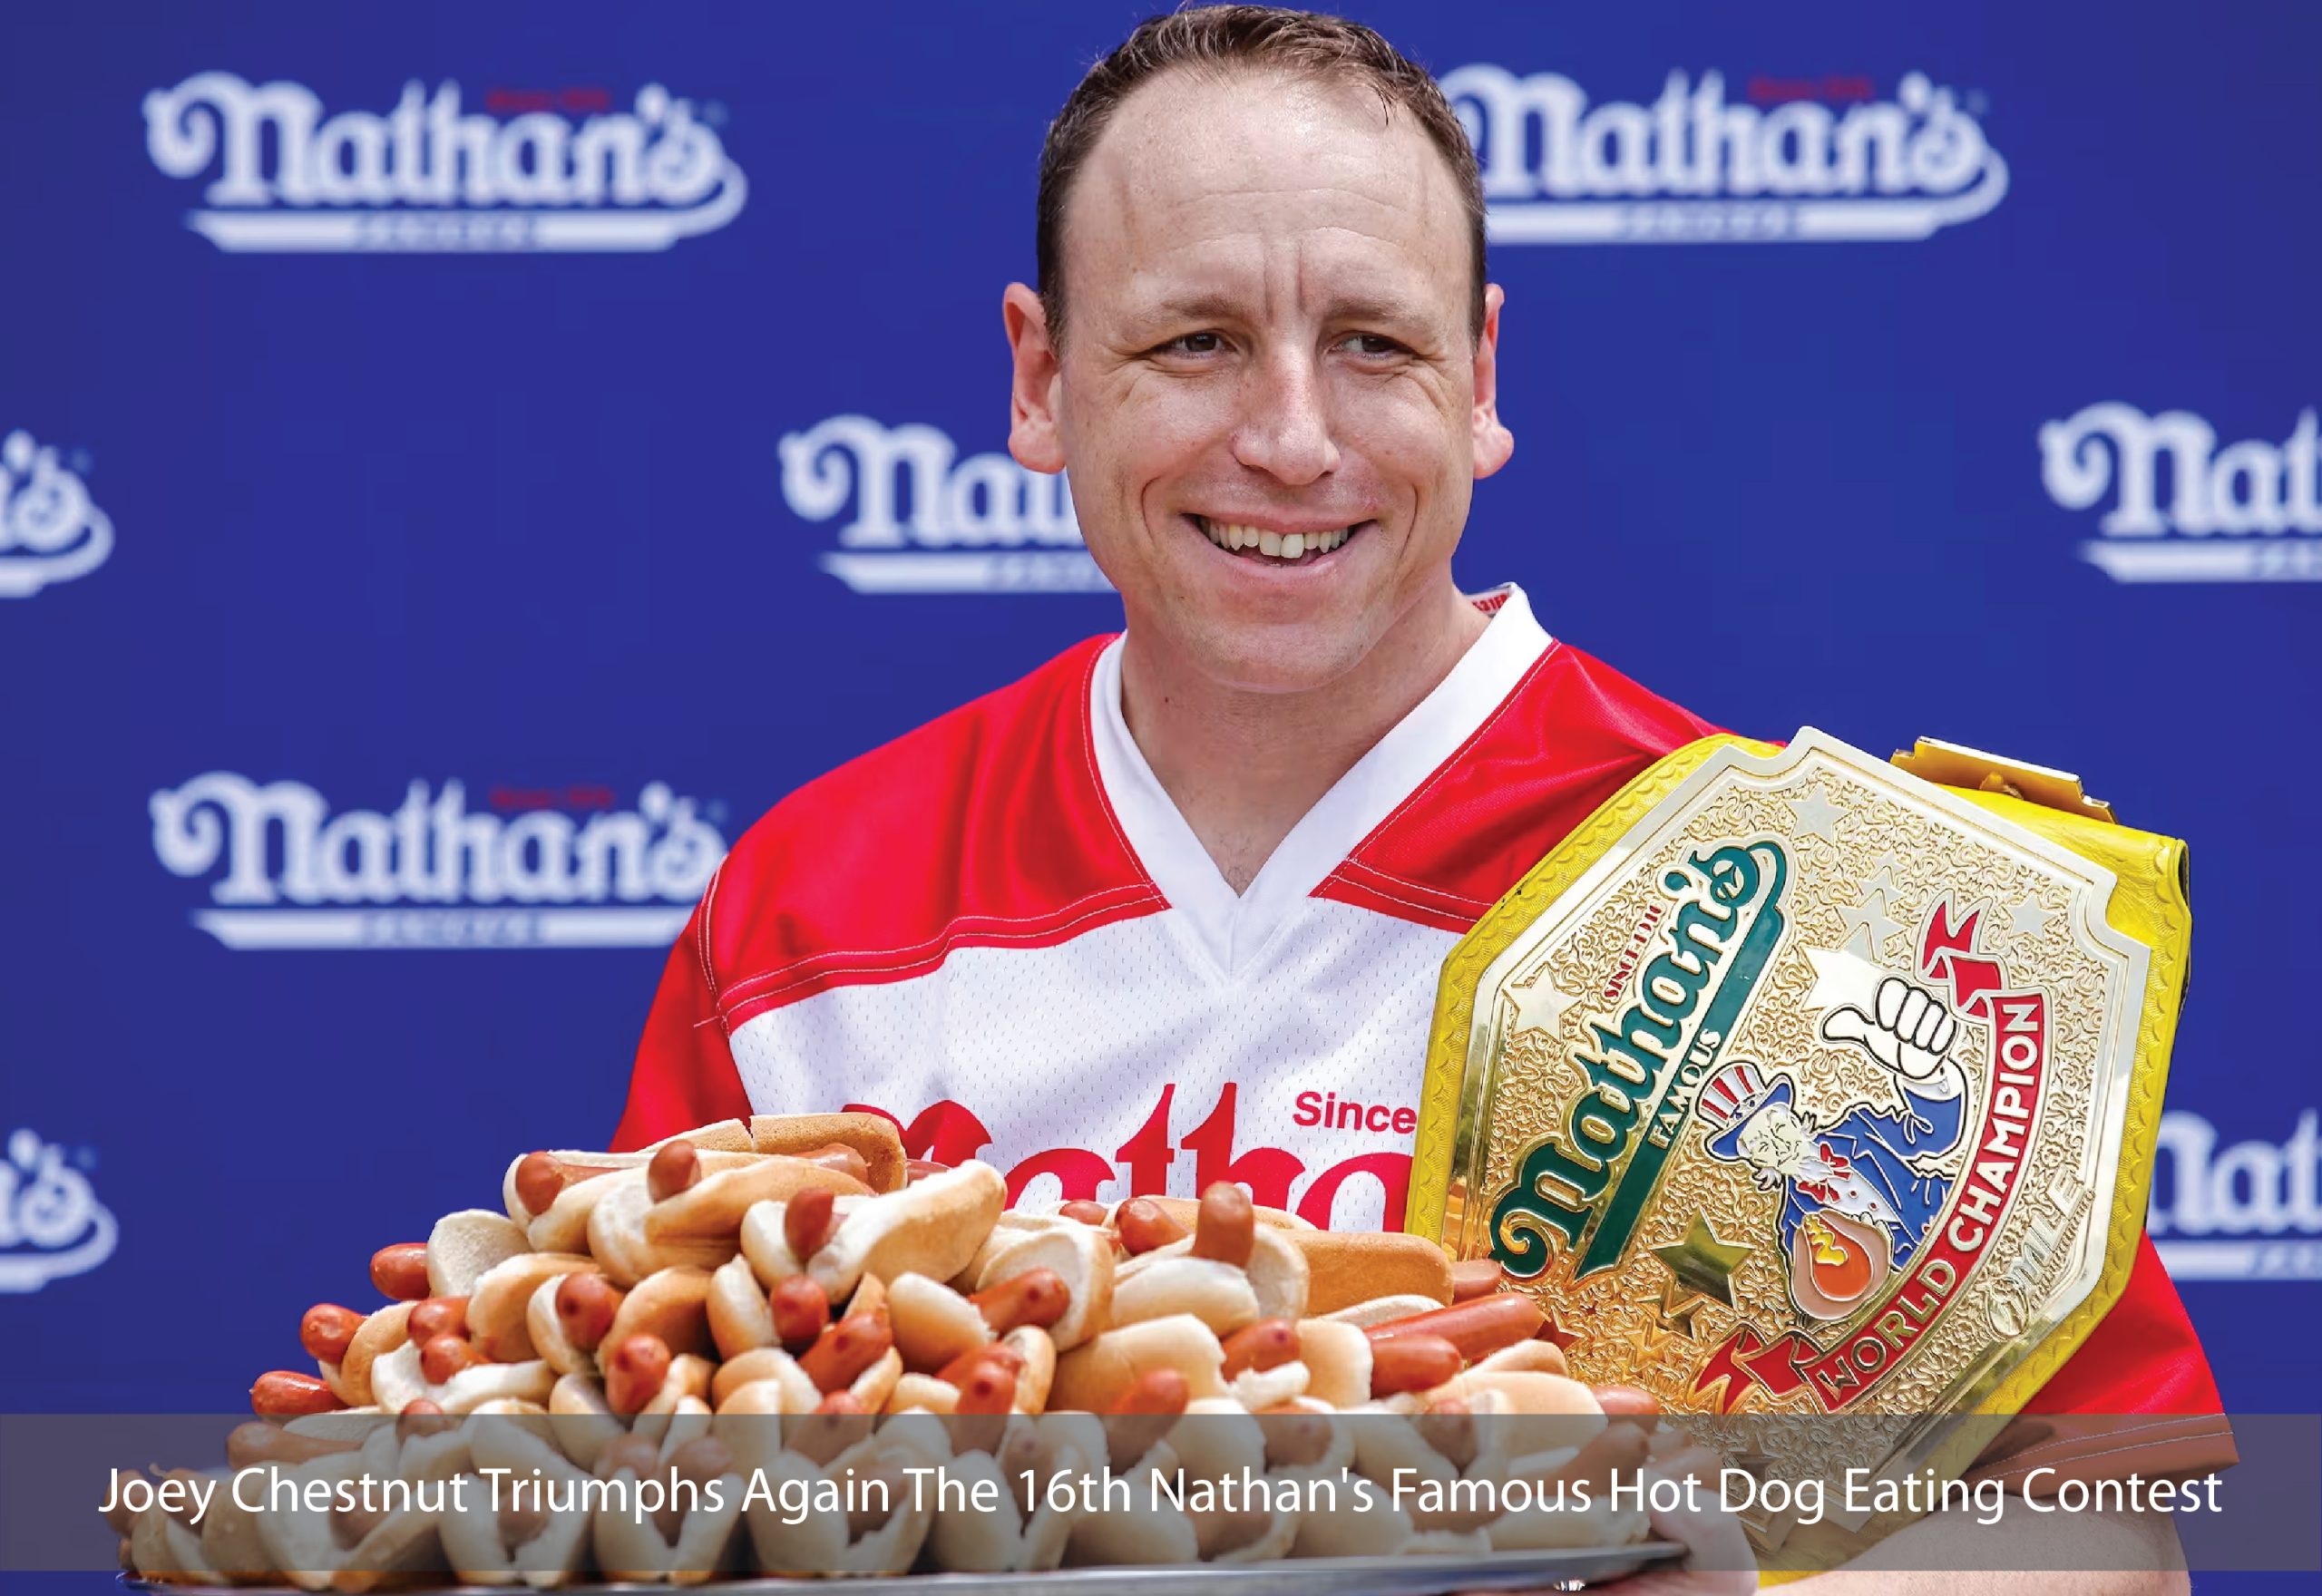 Joey Chestnut Triumphs Again The 16th Nathan's Famous Hot Dog Eating Contest